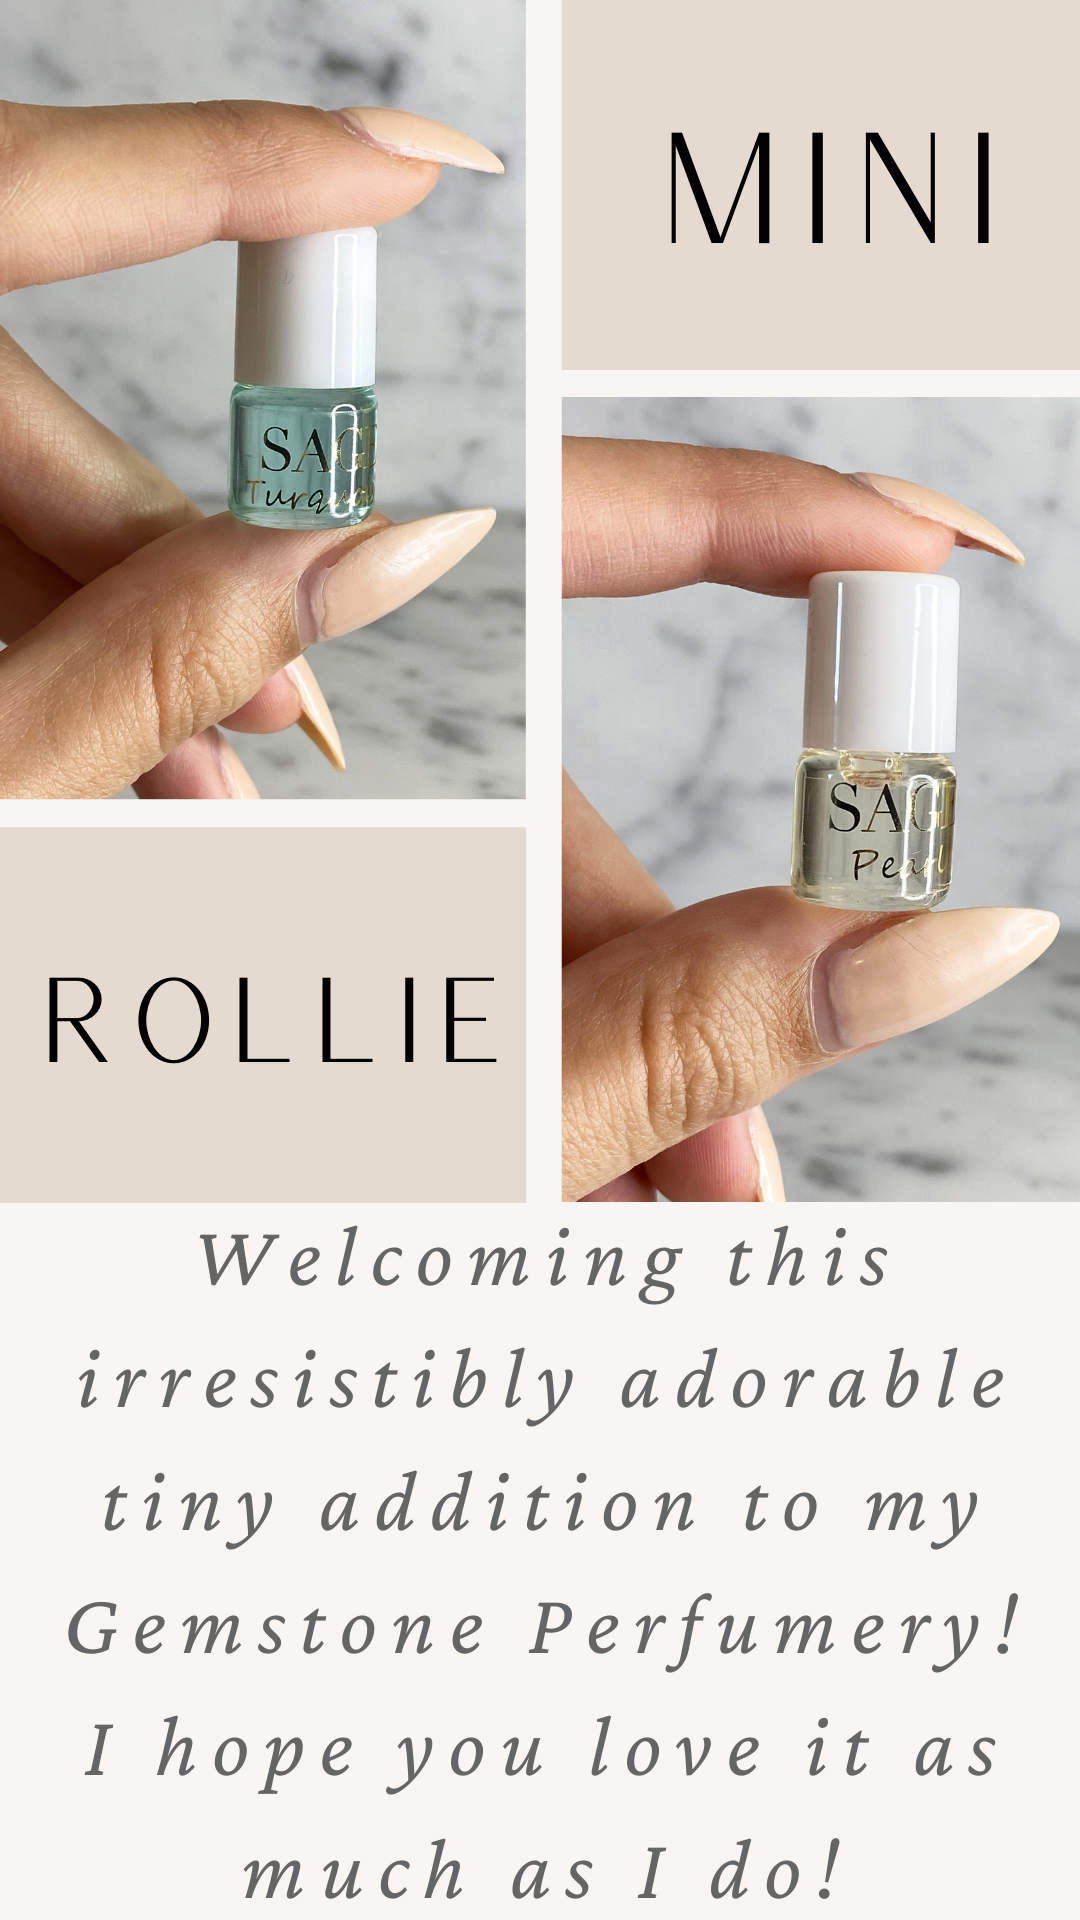 Words mini rollie , Welcoming this irresistably adorable tiny addition to my gemstone perfumery! I hope you love it as much as I do! With images of turquoise mini rollie glass bottle with white cap and Pearl mini rollie glass bottle white cap in between women’s thumb and pointer finger.